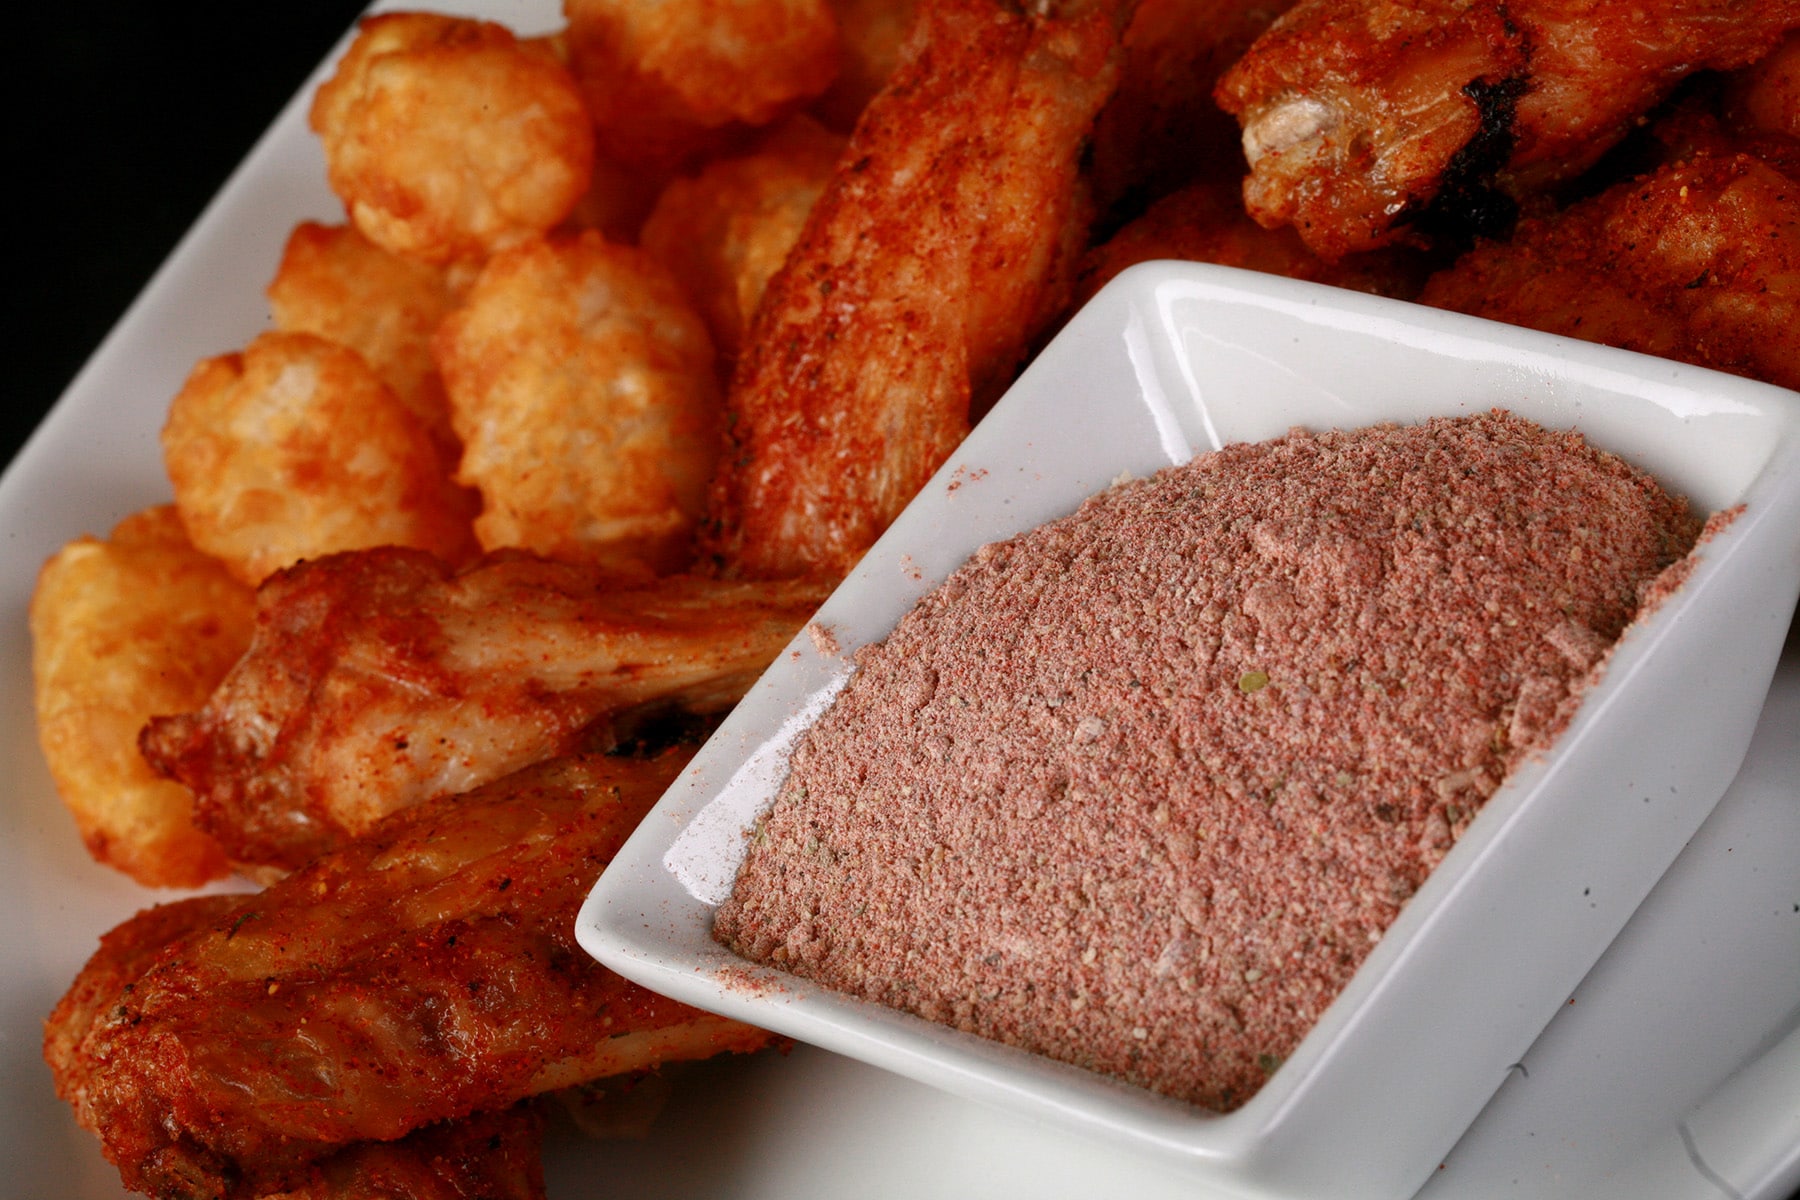 A small, square white bowl of a deep orange-red dry rub, on a larger plate of wings and tater tots. The wings are coated in the same red dry rub.